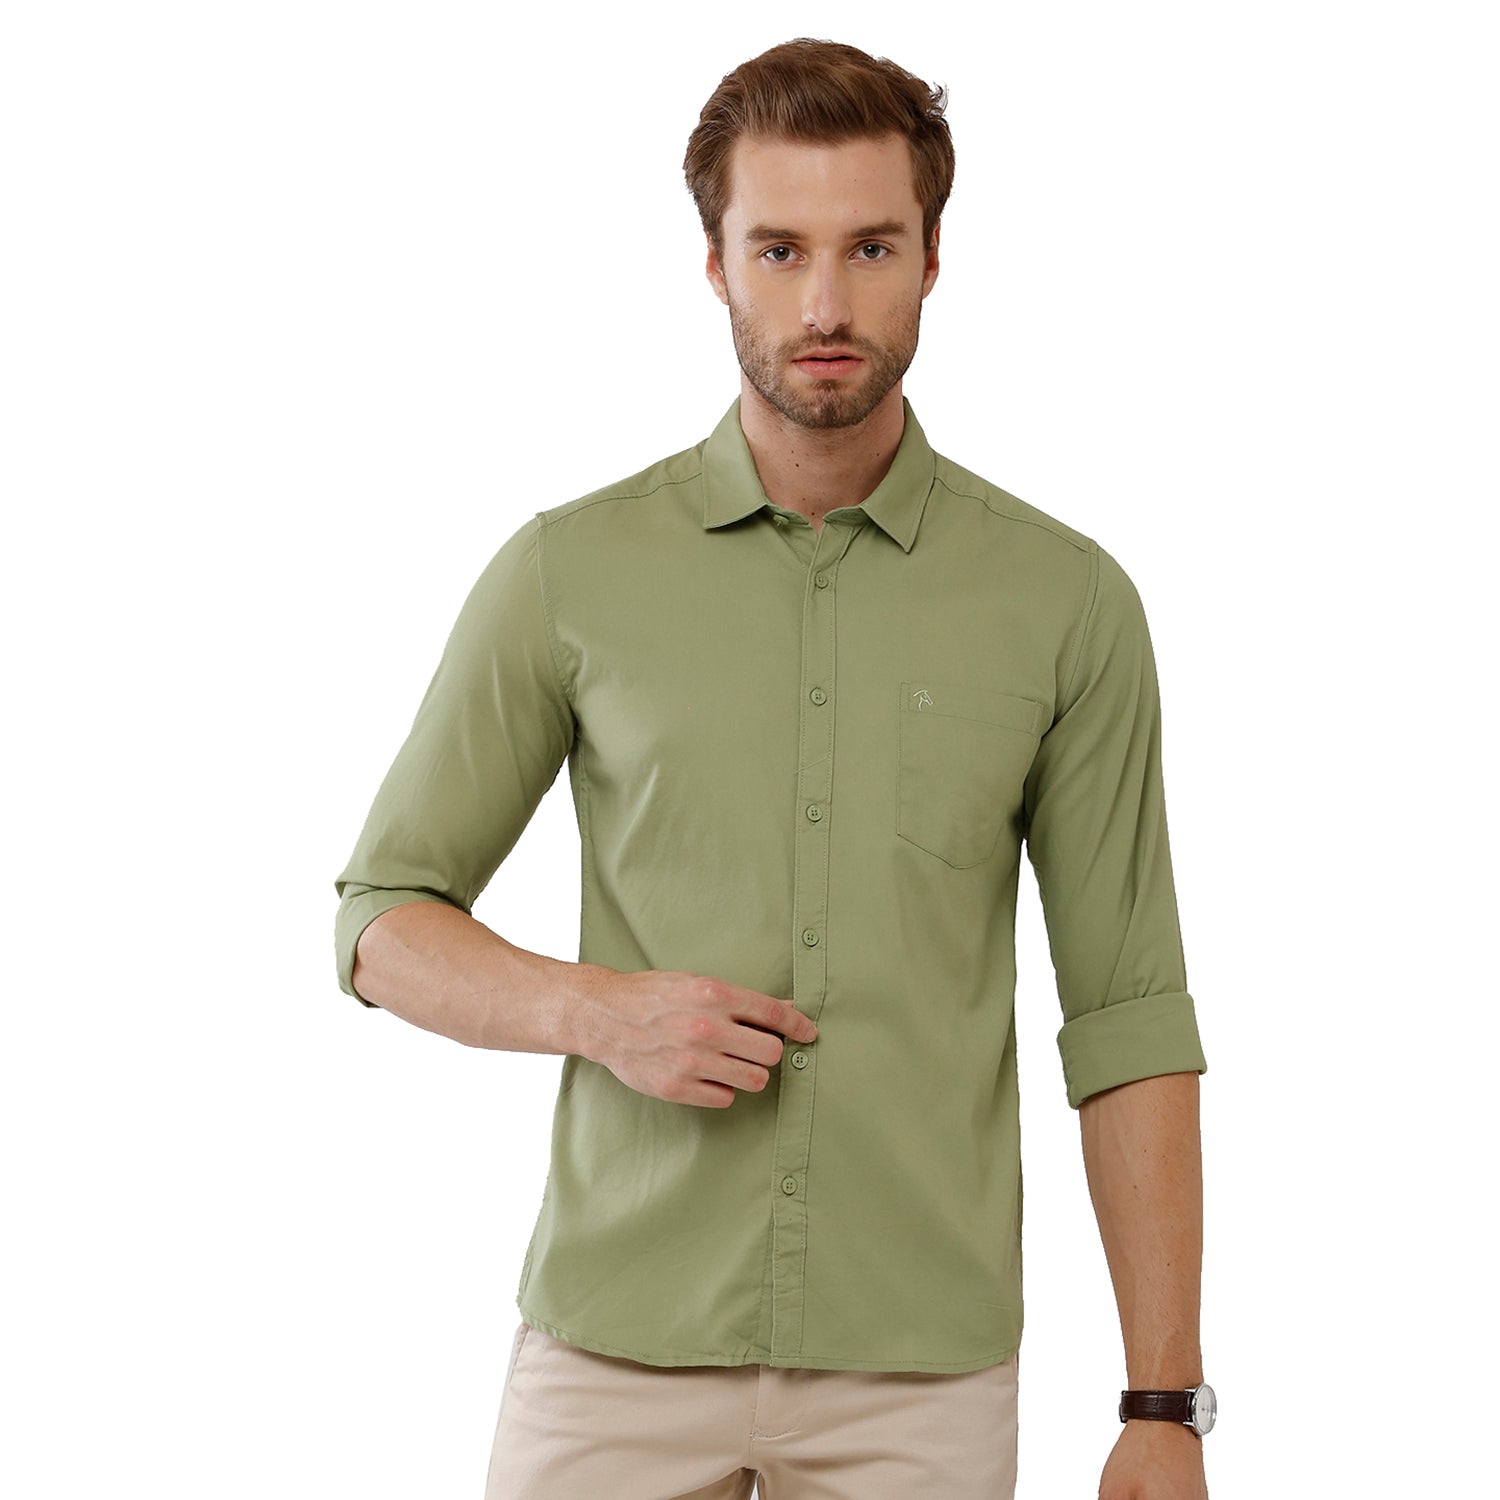 Classic Polo Bro Mens 100% Cotton Solid Full Sleeve Slim Fit Polo Neck Green Color Woven Shirt (SBN1-70 C-FS-SLD-BSL) Classic Polo 